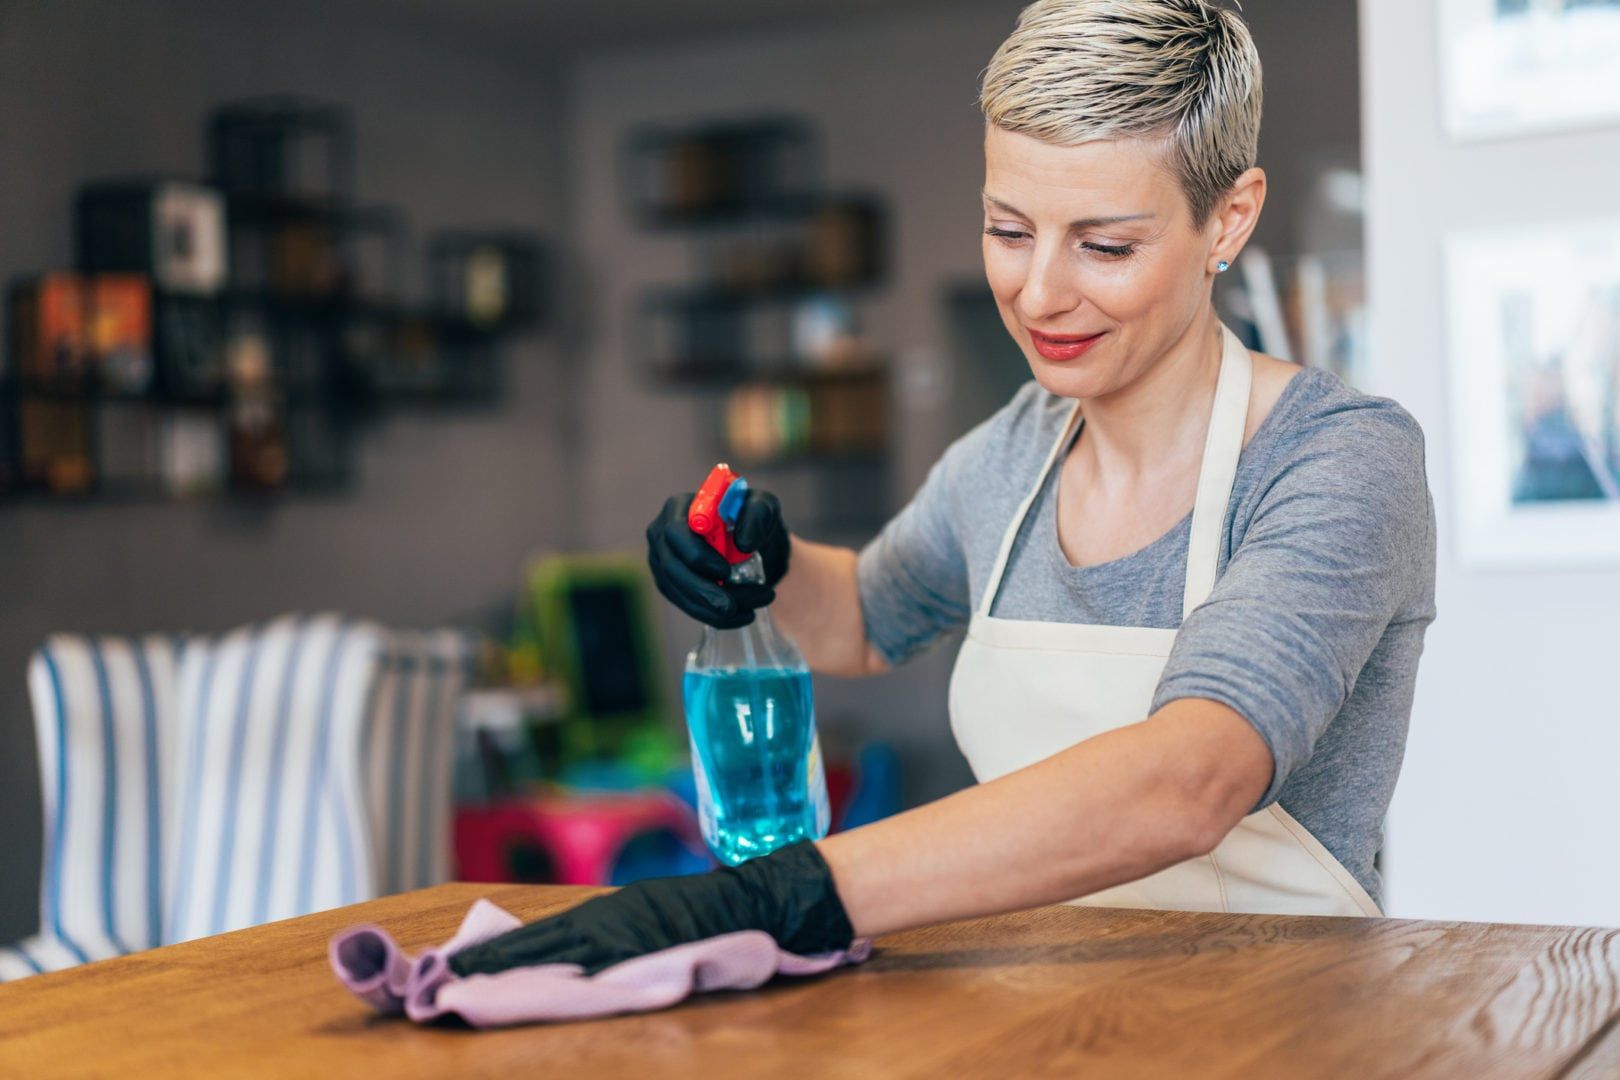 How to start a successful housecleaning business